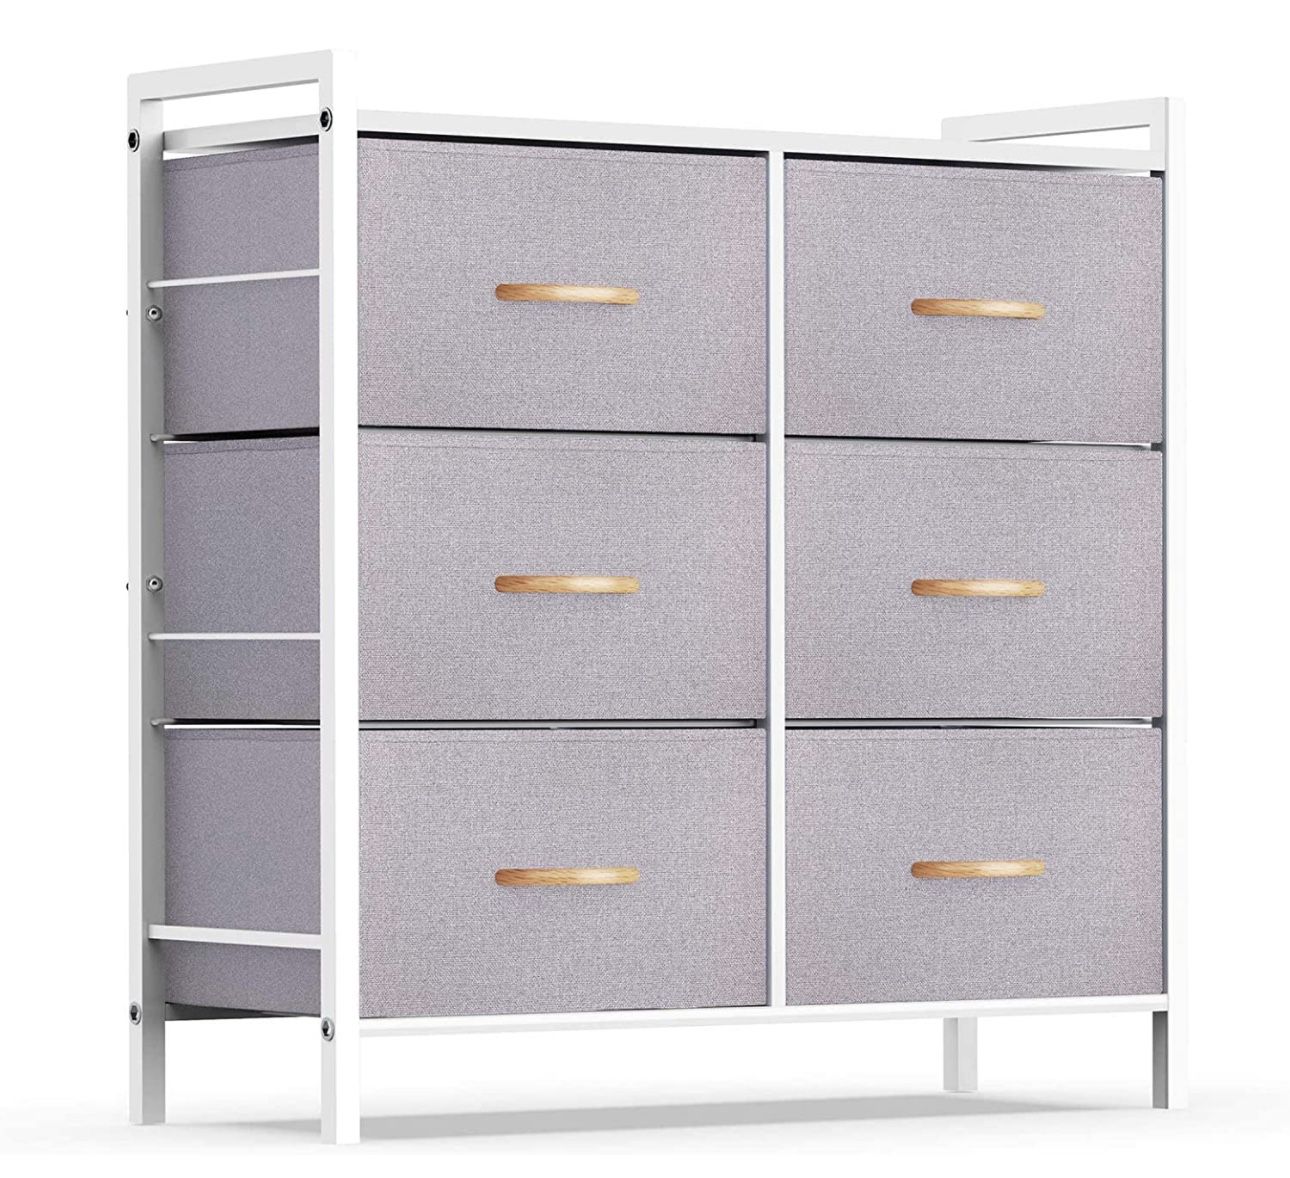 (brand new) ROMOON Dresser Organizer with 6 Drawers, Fabric Storage Dresser Tower for Bedroom, Hallway, Entryway, Closets - Gray